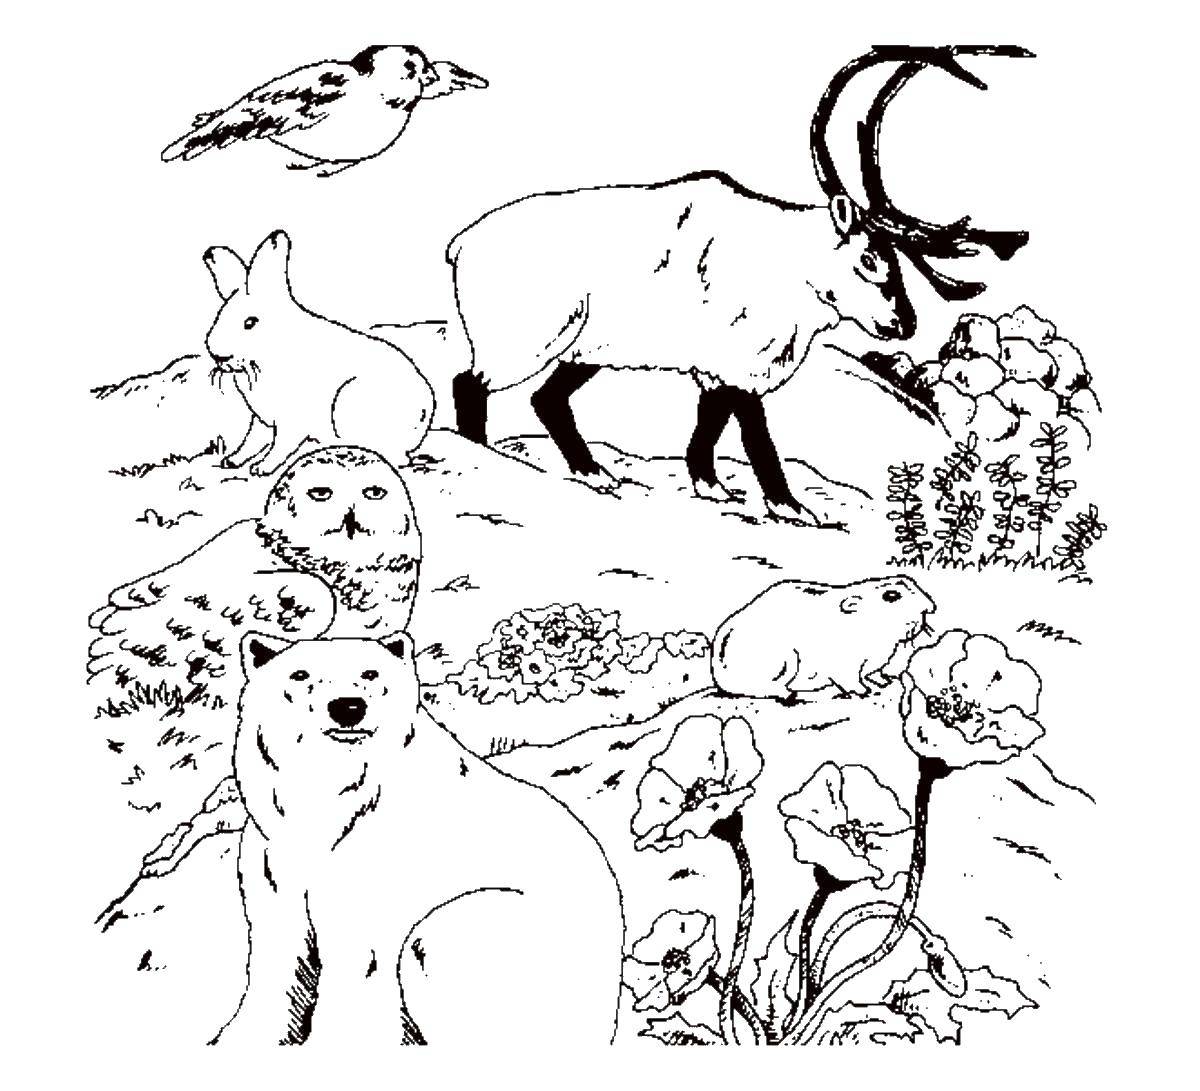 Coloring The animals of the forest. Category Wild animals. Tags:  animals, forest.